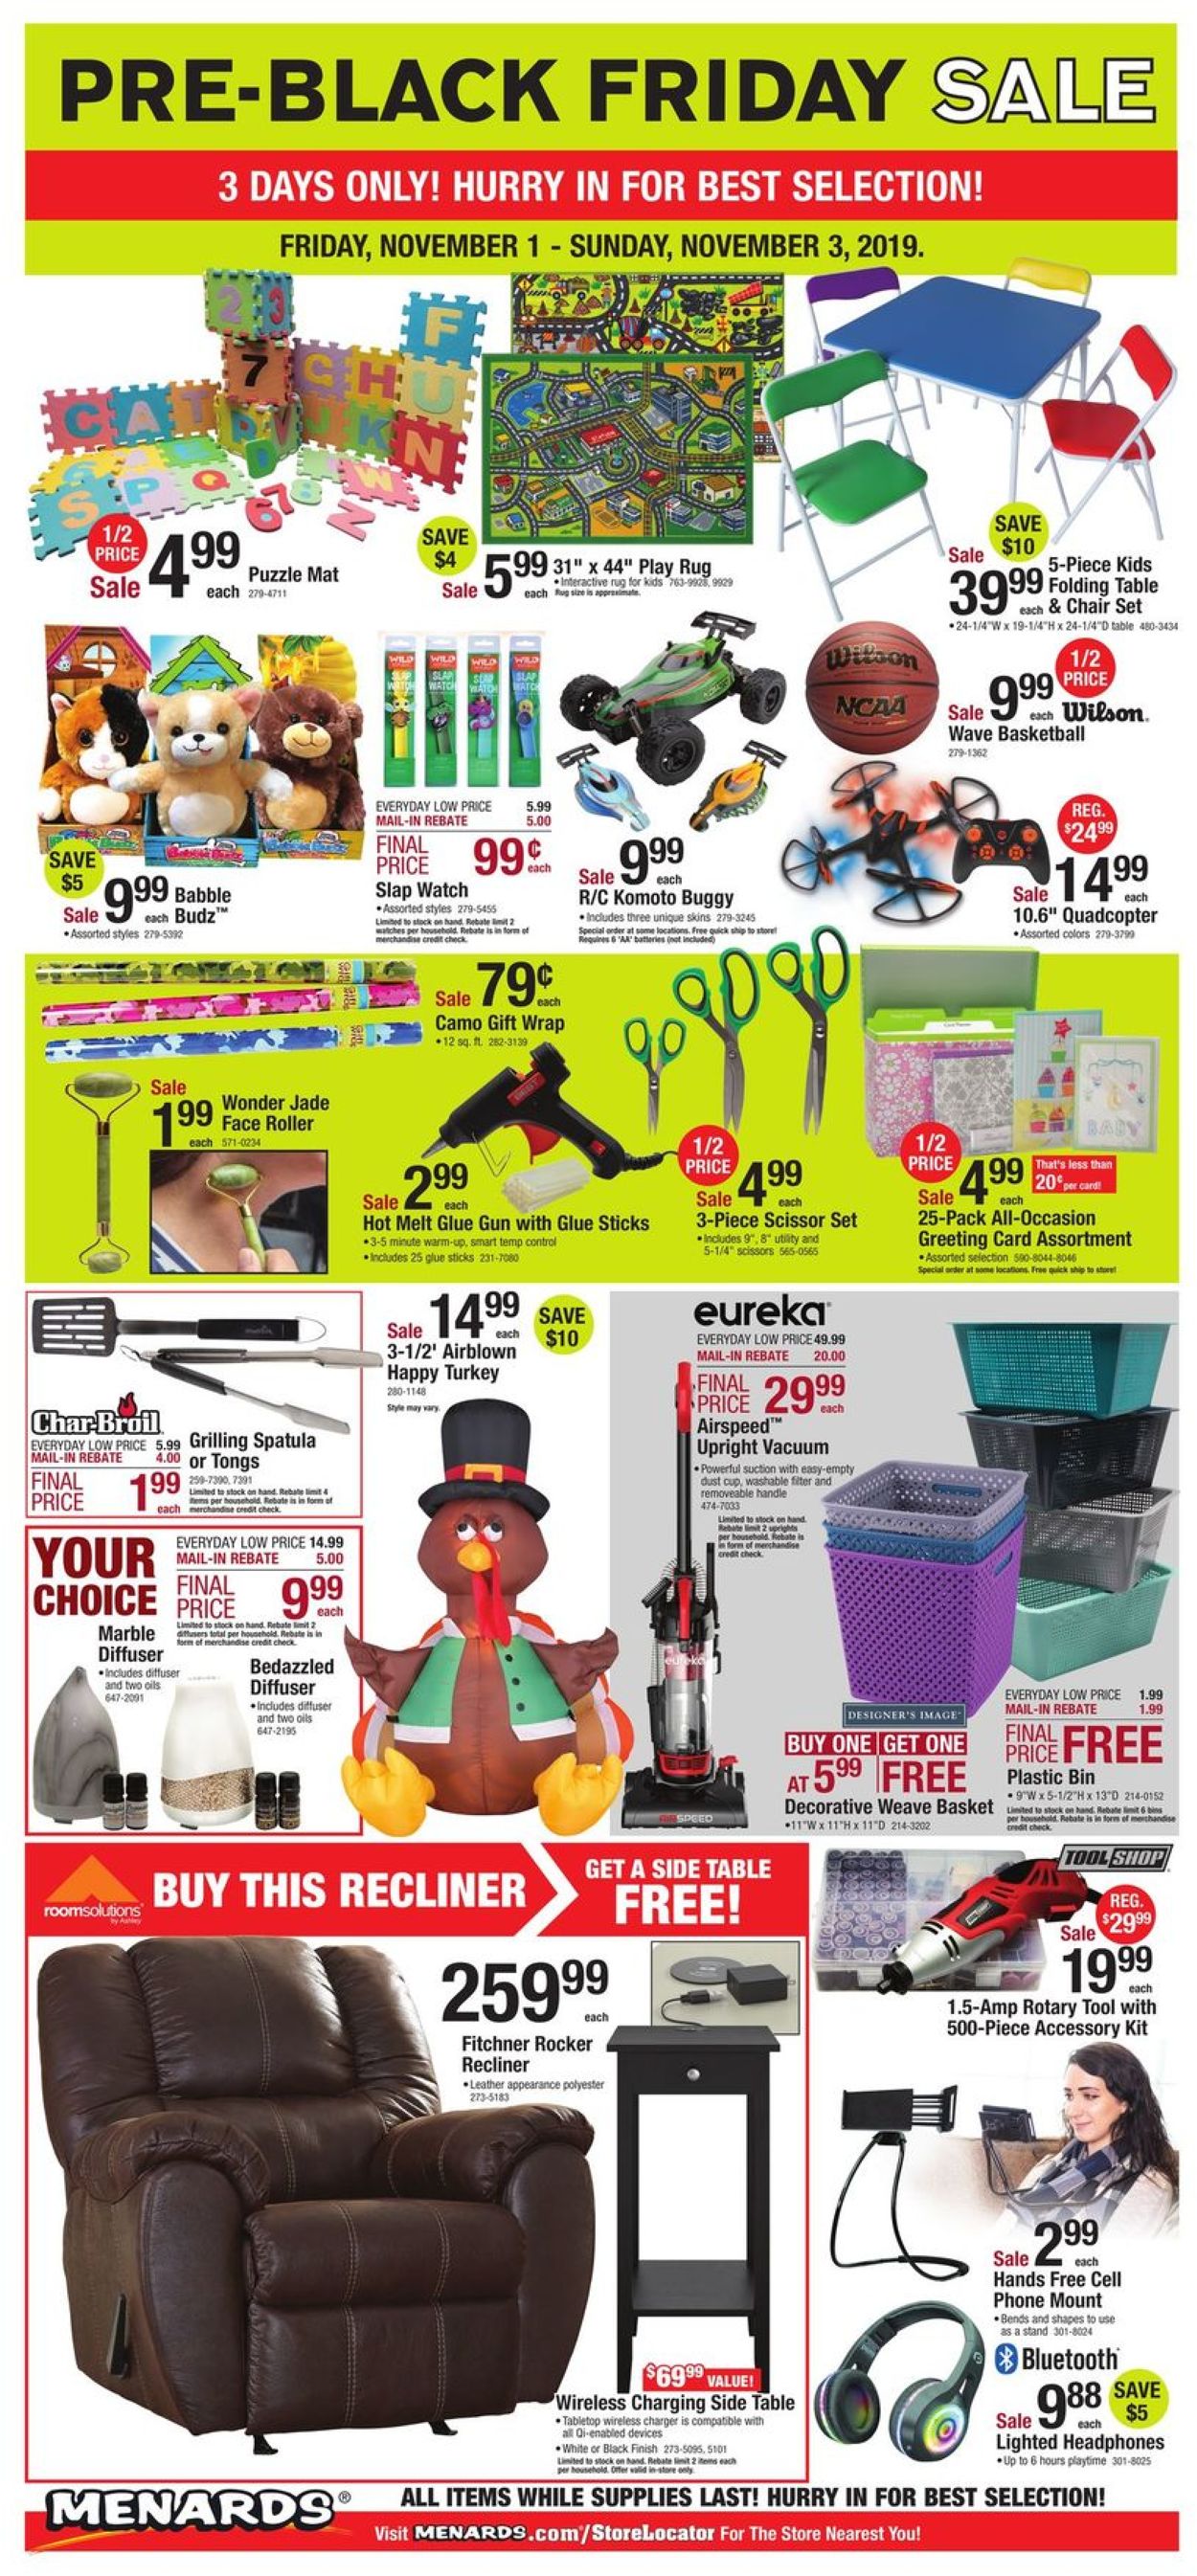 Menards - Black Friday 2019 Current weekly ad 11/01 - 11/03/2019 [8] - 0